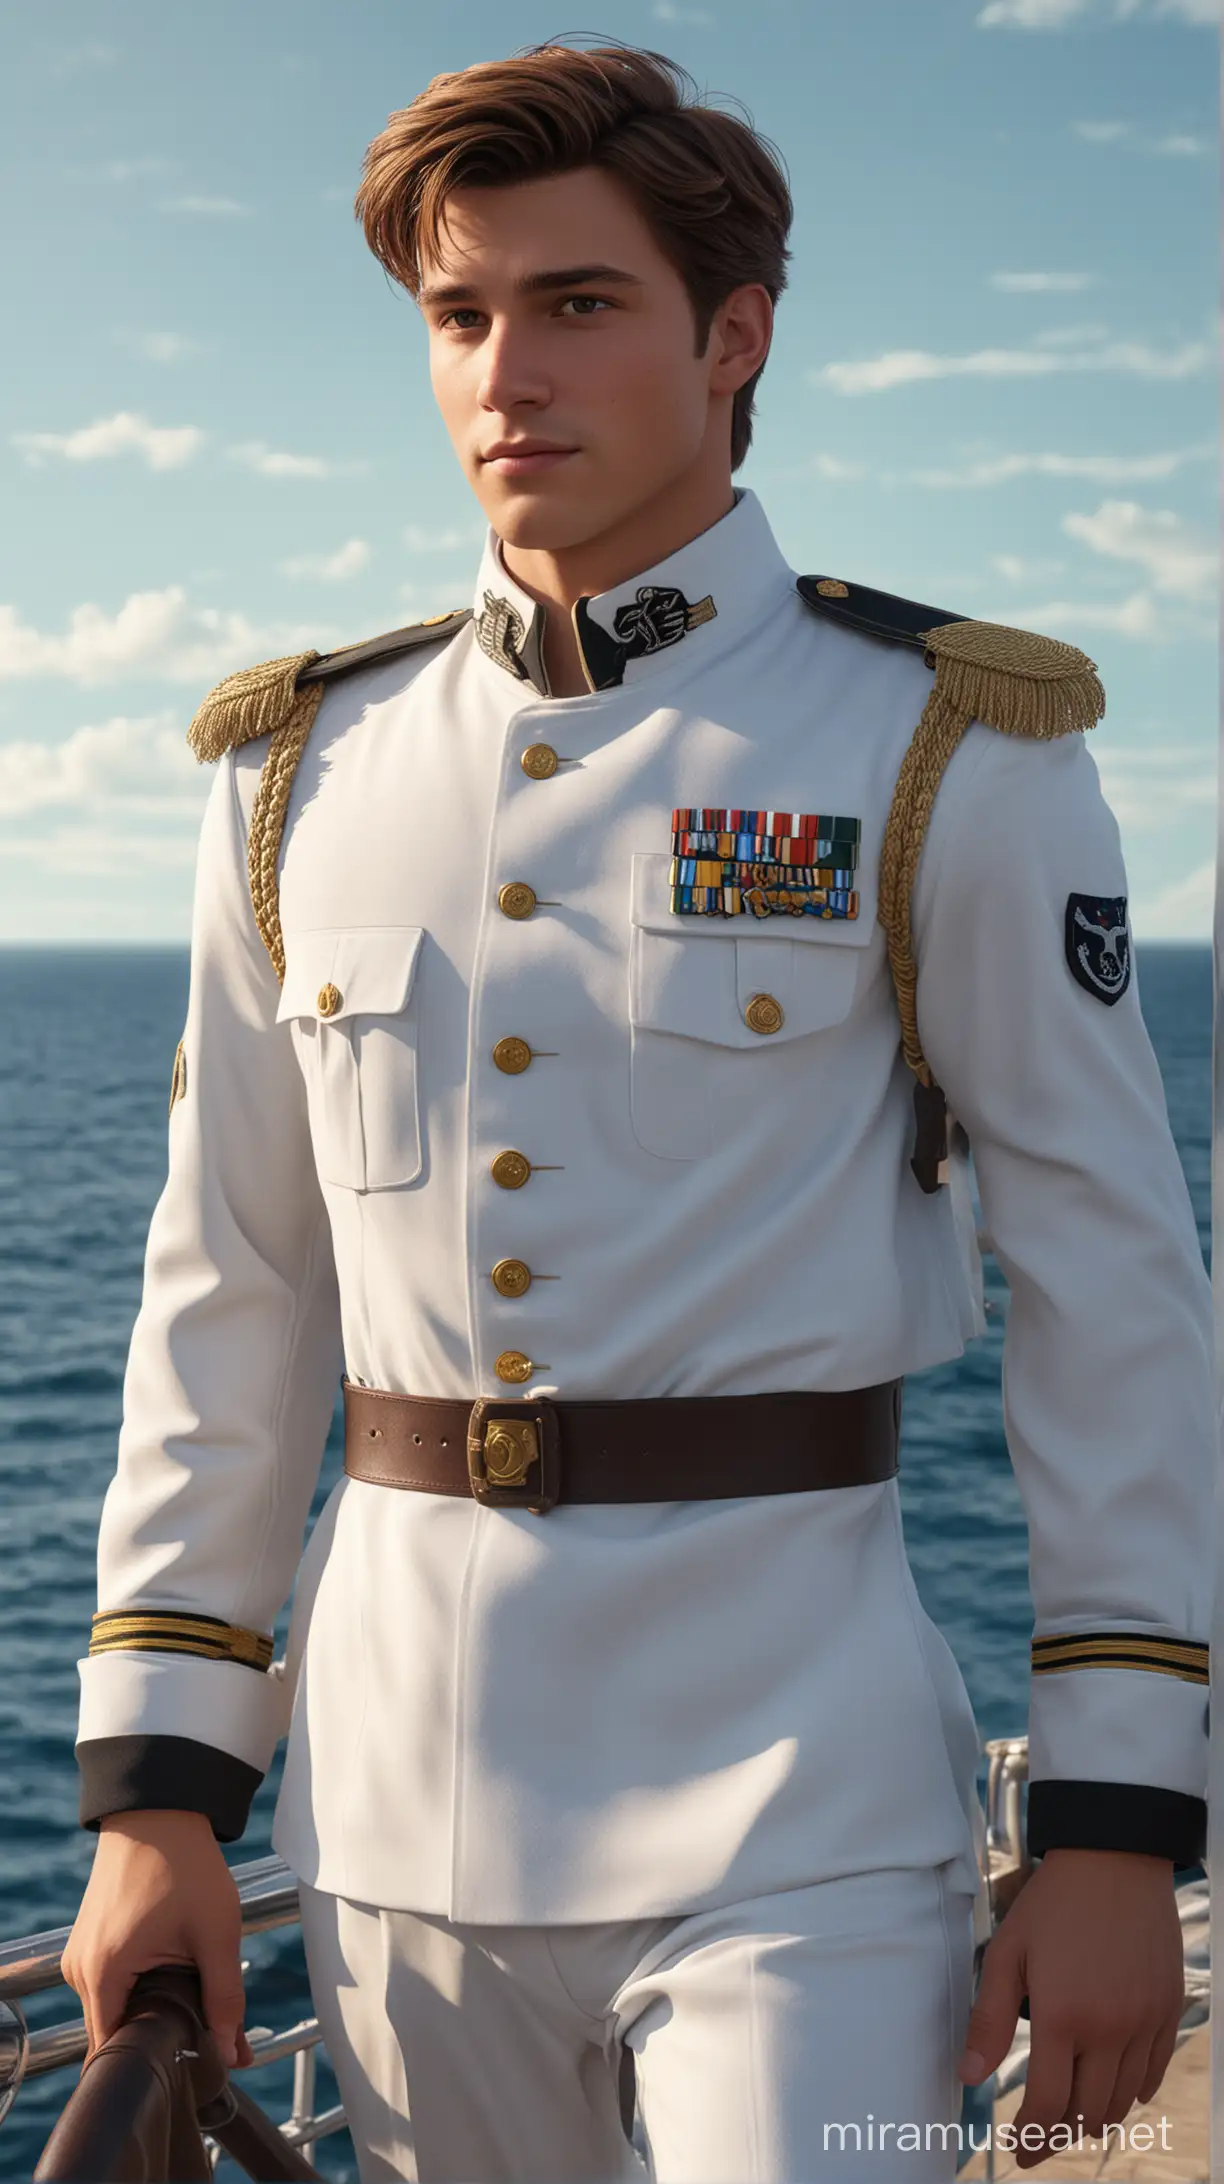 Disney Prince Flynn in Military Uniform Amidst Natural Sea Background